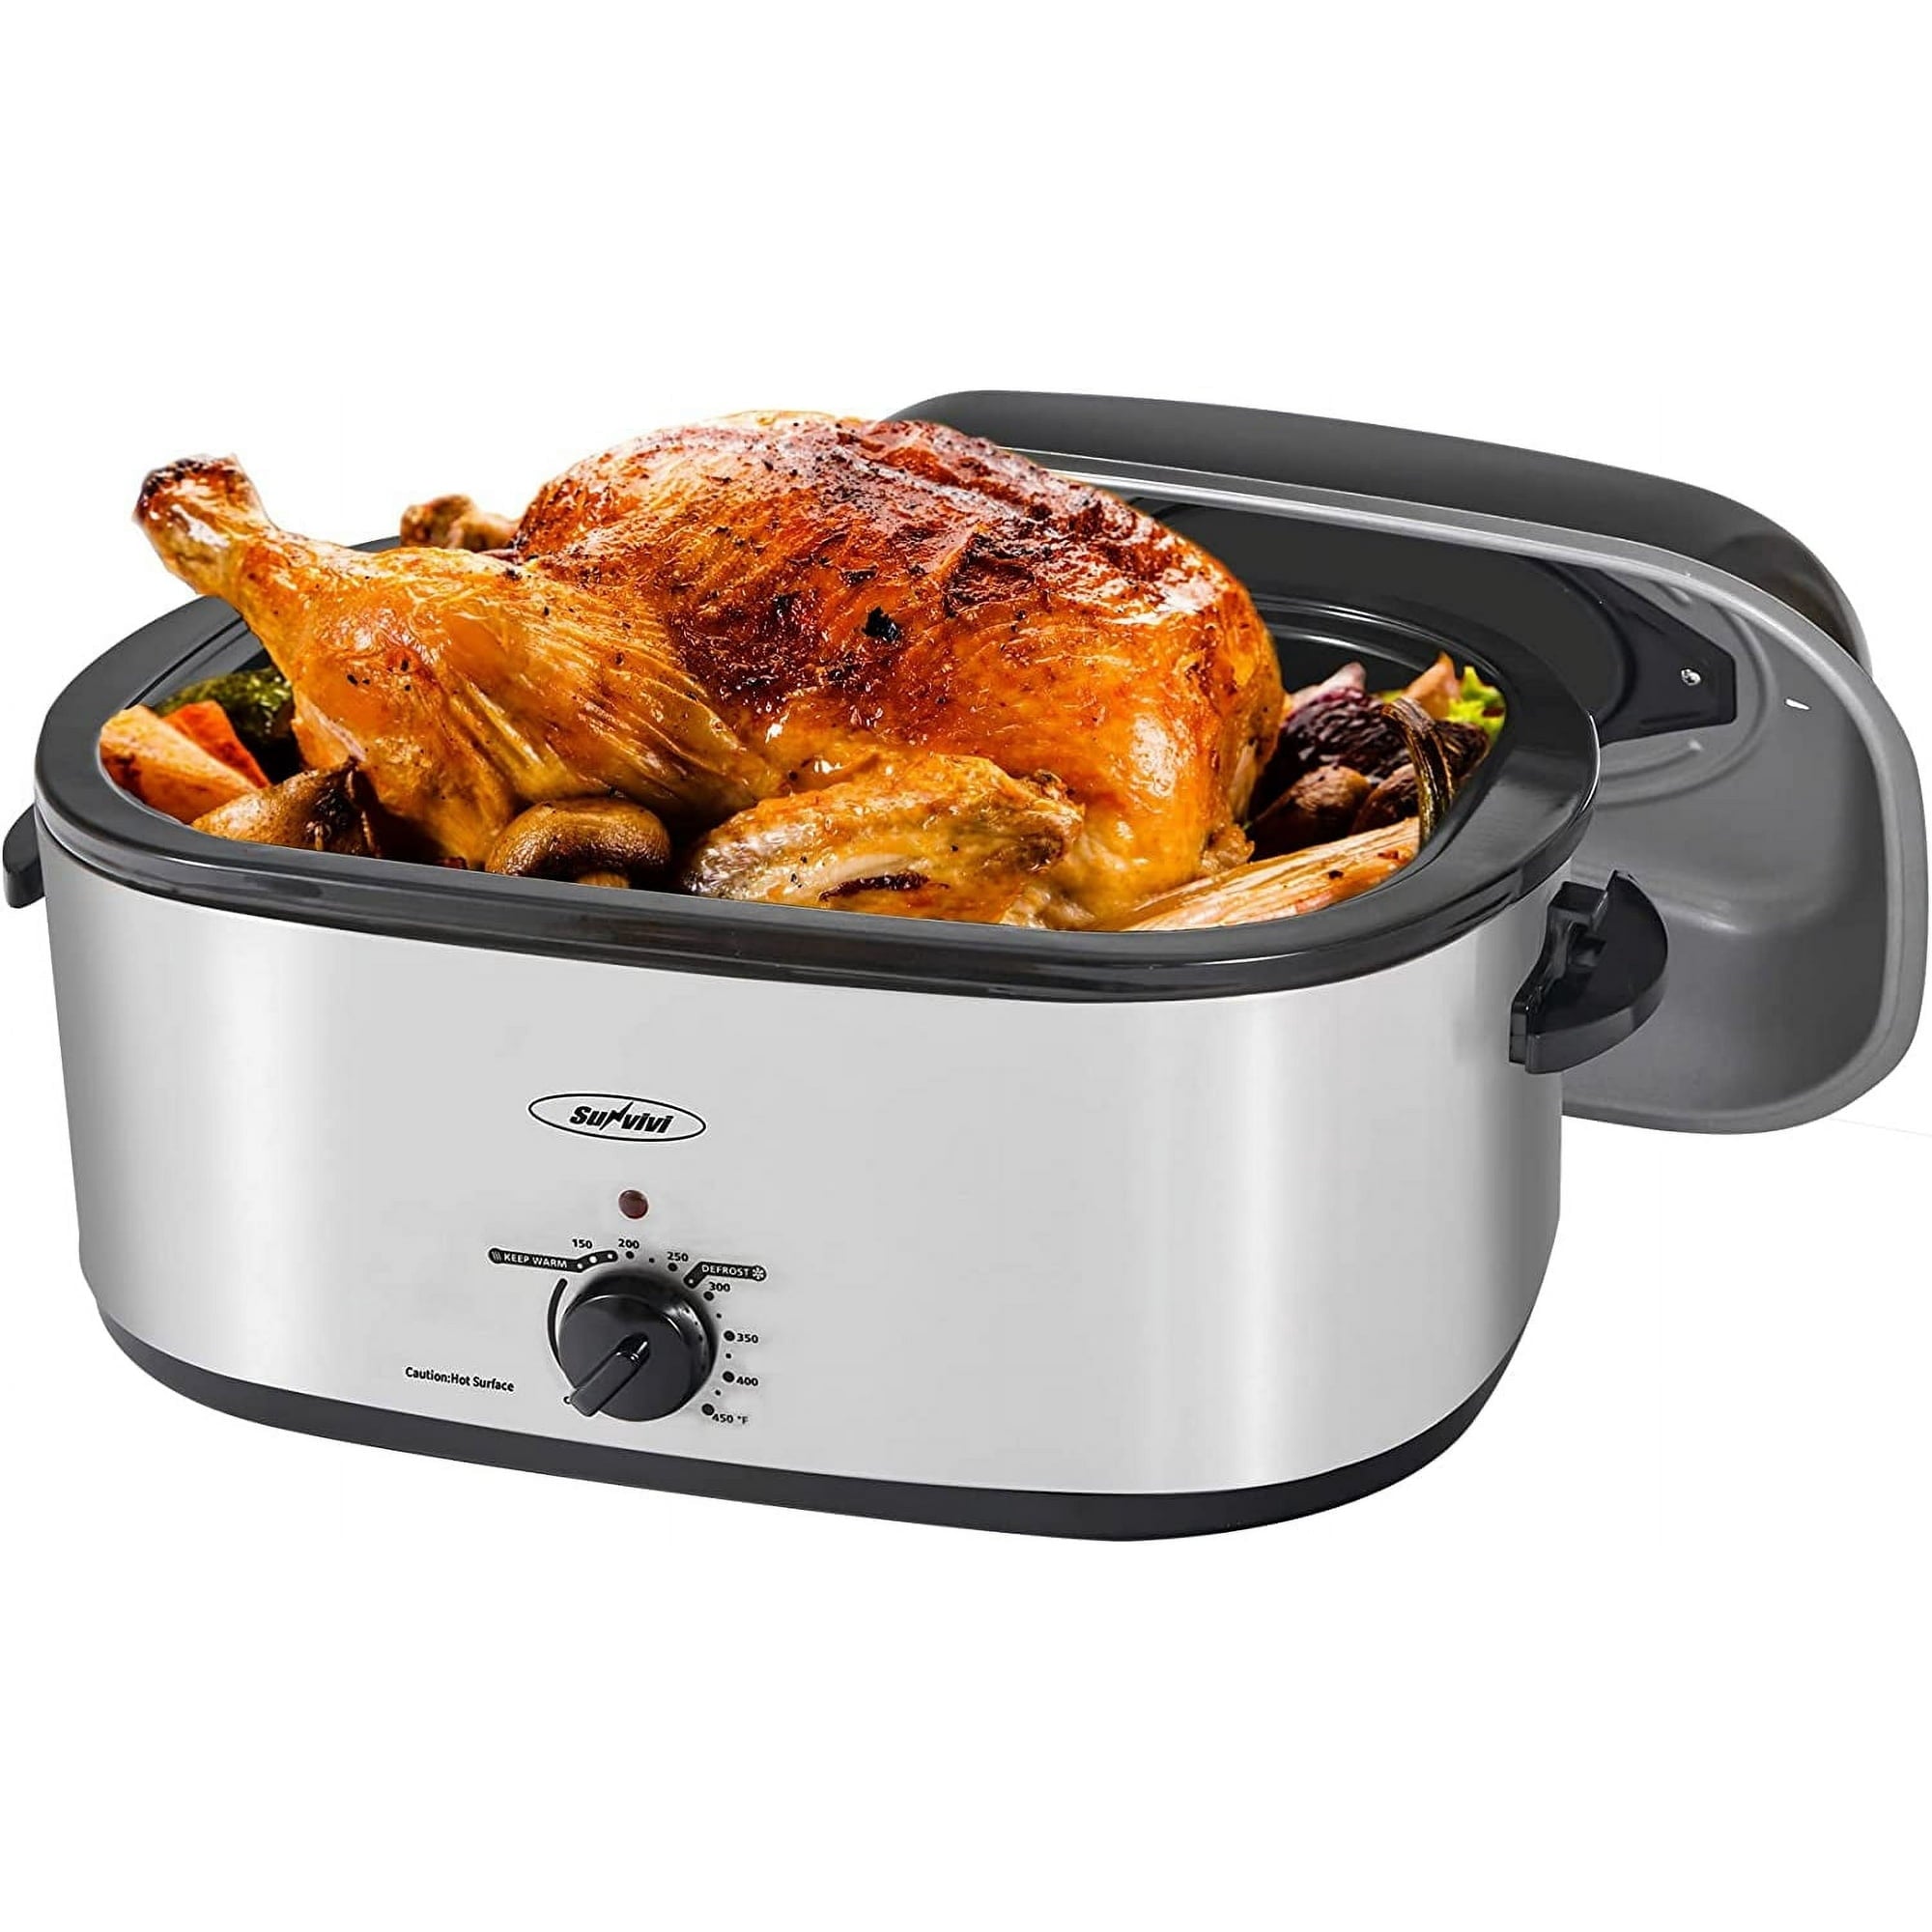 http://royalcraft.store/cdn/shop/files/RoyalCraft-24-Quart-Electric-Roaster-Oven-with-Visible-Self-Basting-Lid-Stainless-Steel-Silver_af14f699-d941-43a7-94bc-d27ae5c237be.7f3e1b240cd9ba60763dae0cf7491b27.jpg?v=1696840201